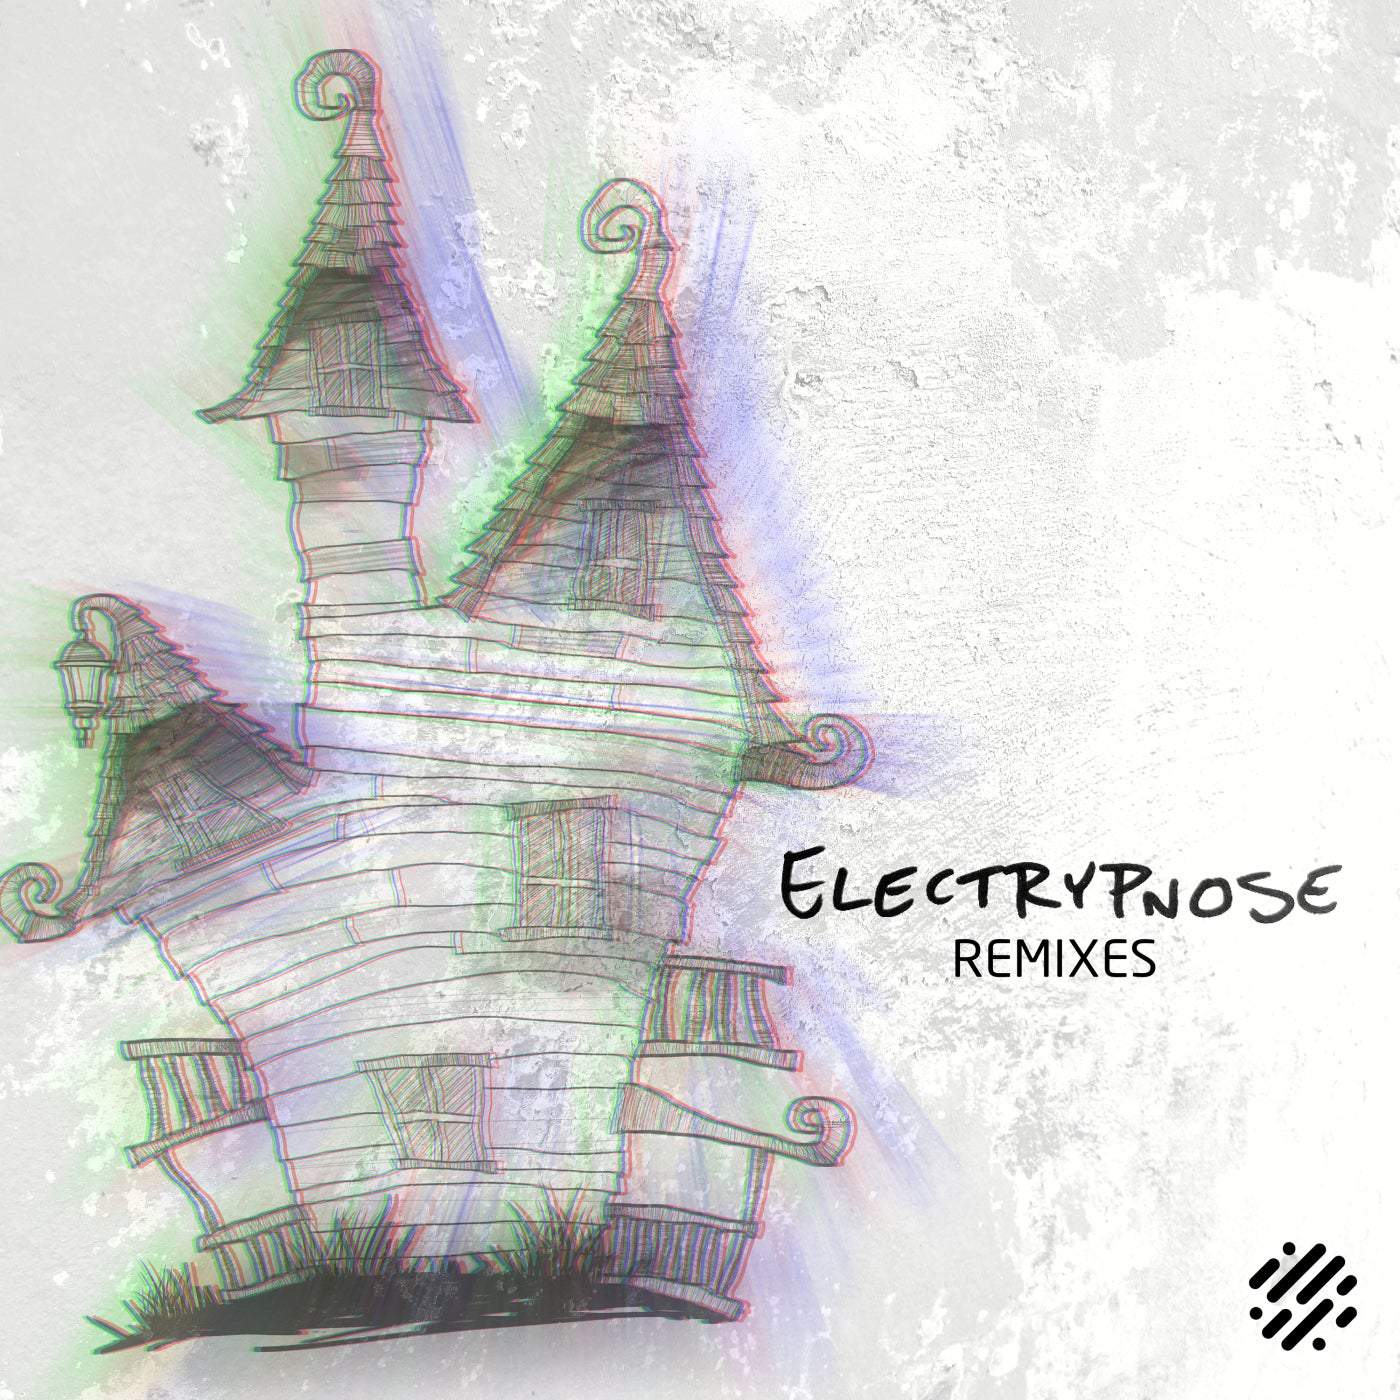 image cover: Electrypnose - Electrypnose Remixes on Digital Structures